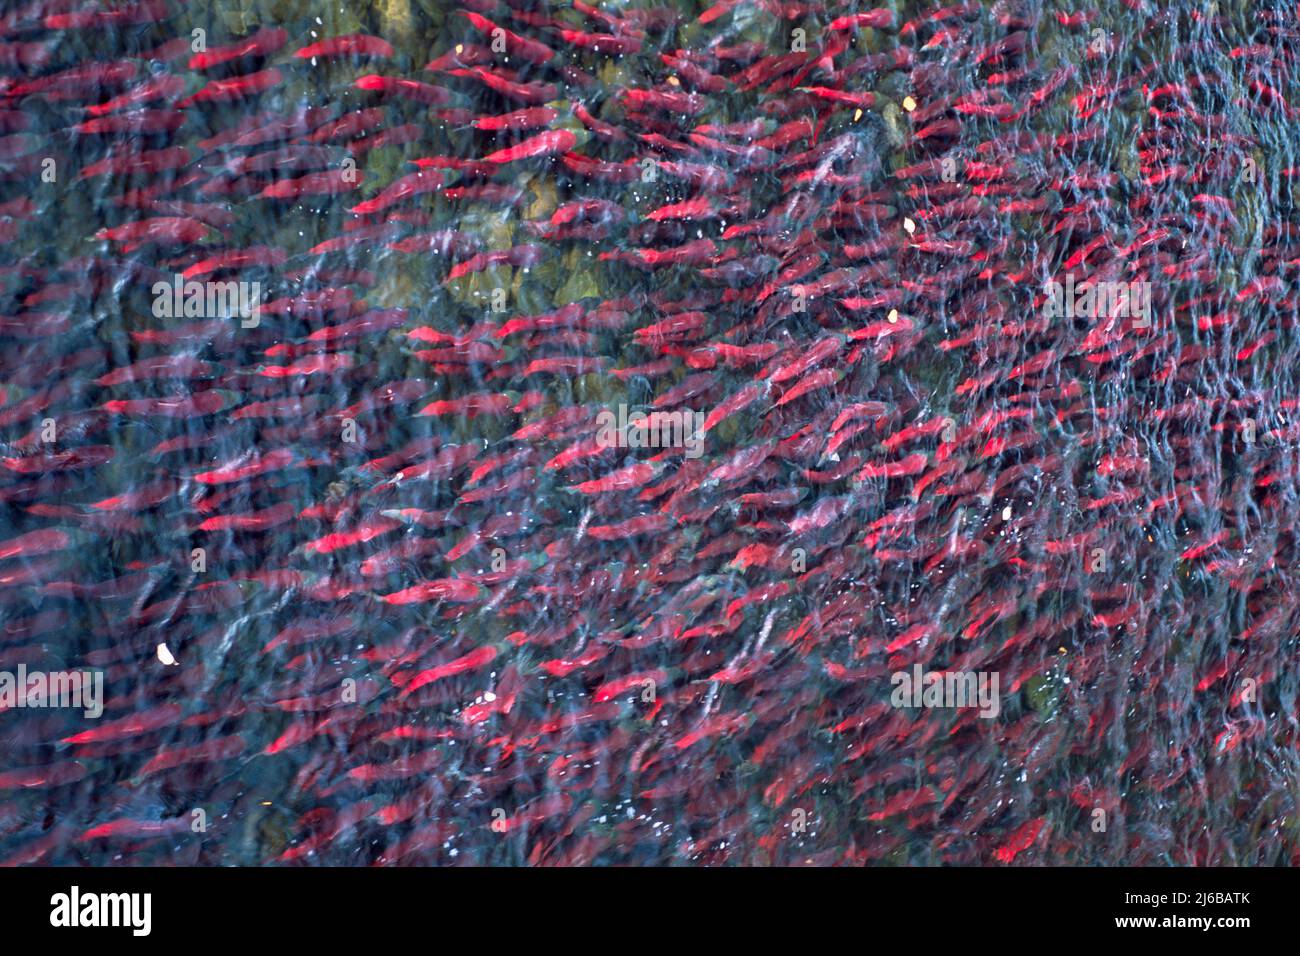 A schooling of Sockeye Salmons (Oncorhynchus nerka), swimming up the Adams River, Roderick Haig-Brown Provincial Park, British Columbia, Canada Stock Photo